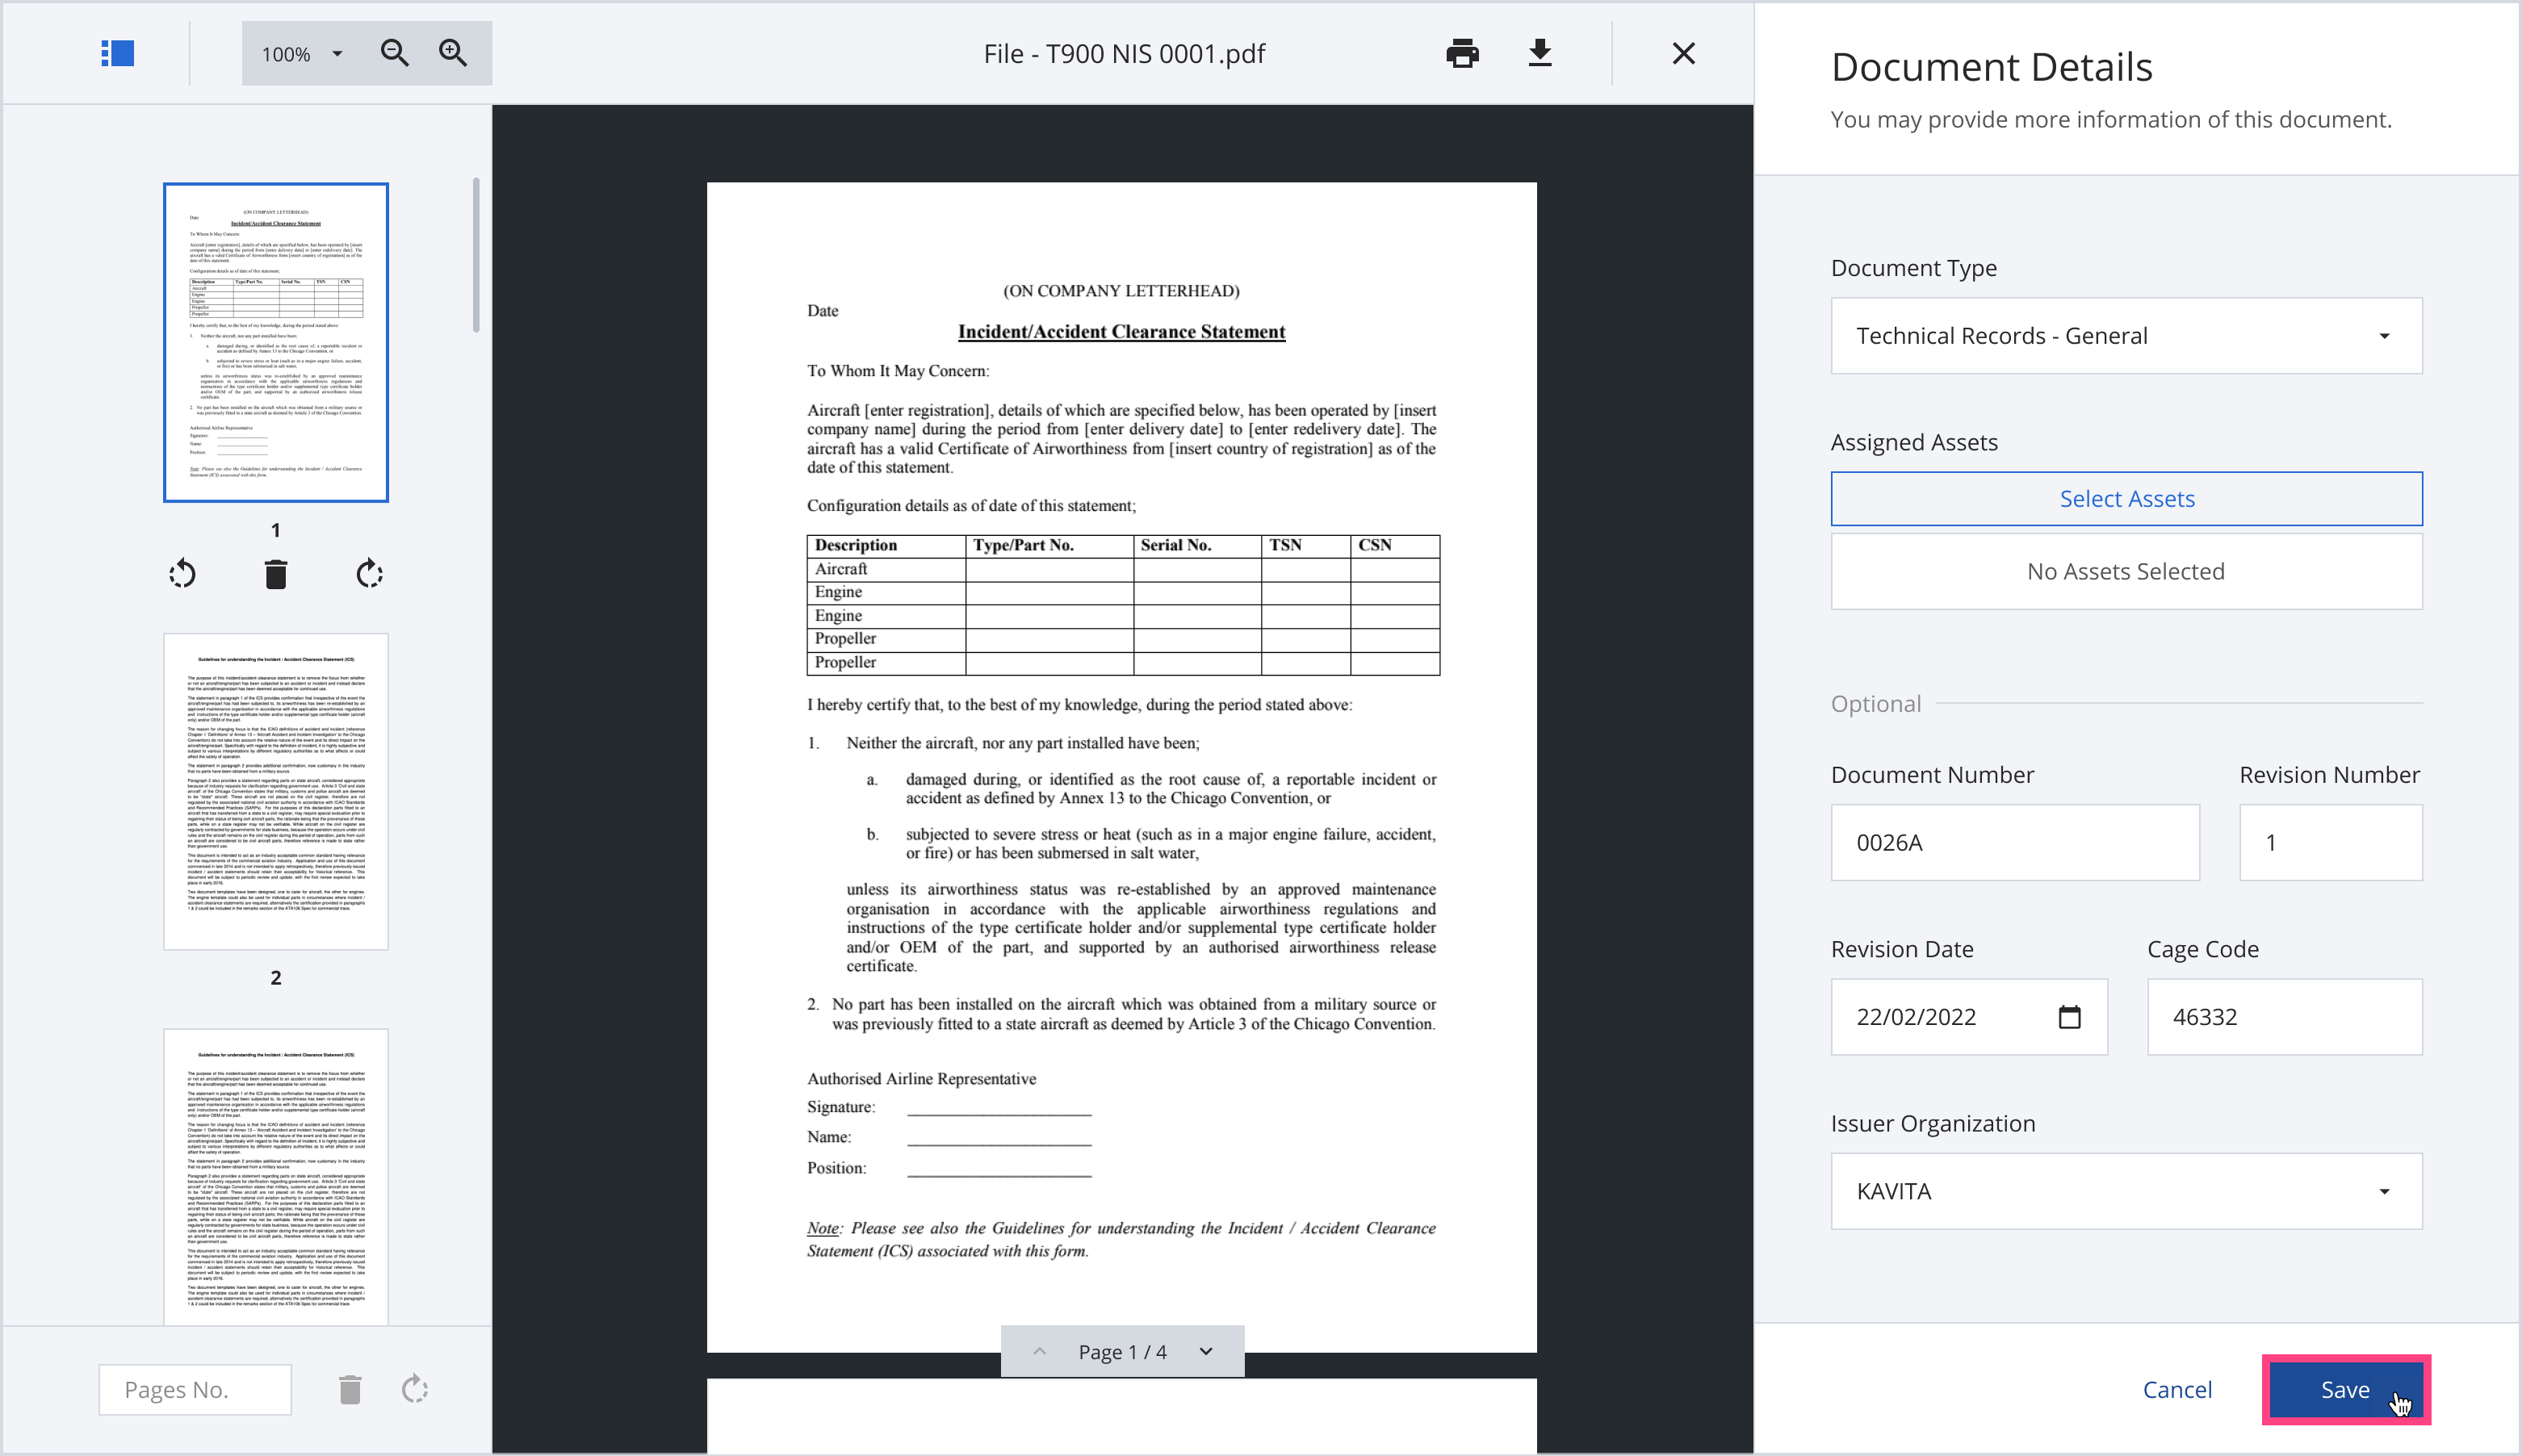 Save your updated document details